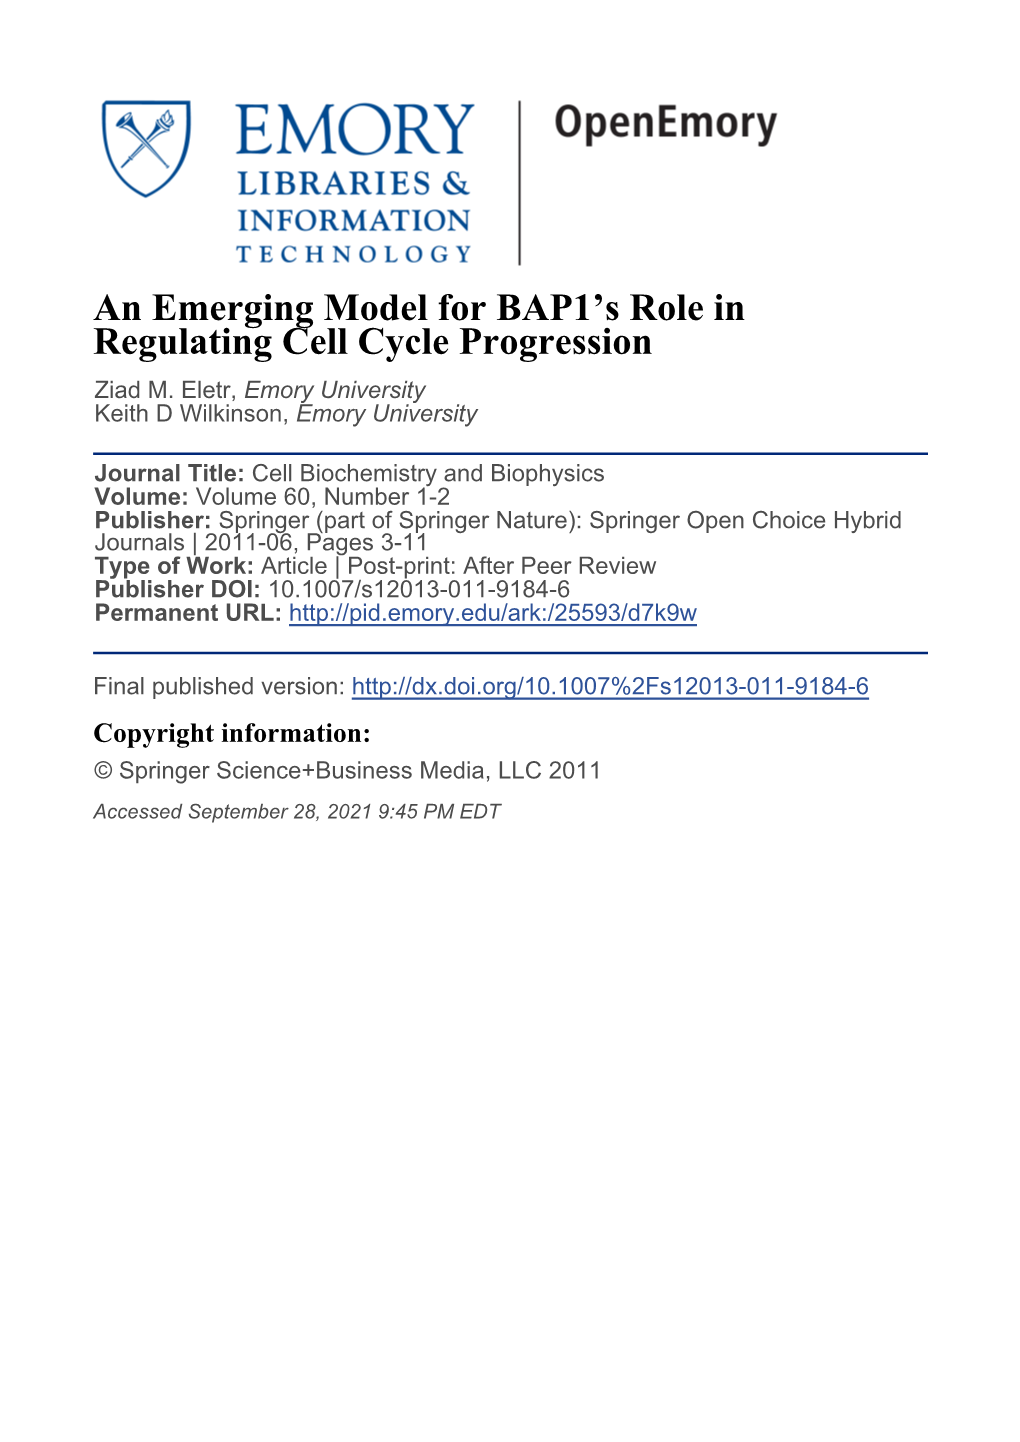 An Emerging Model for BAP1's Role In